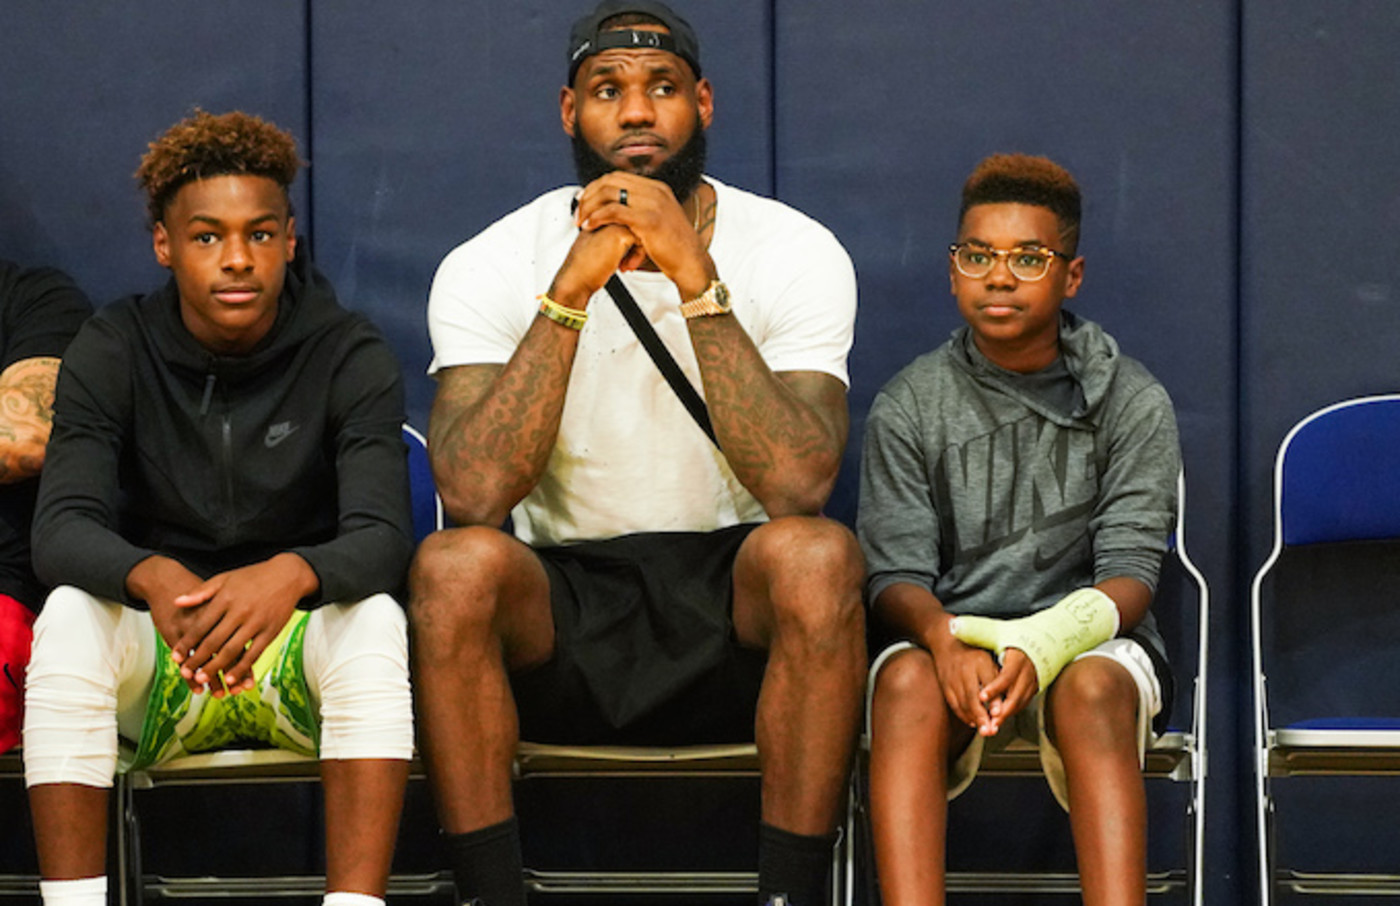 Watch Proud Dad LeBron James Talk About 